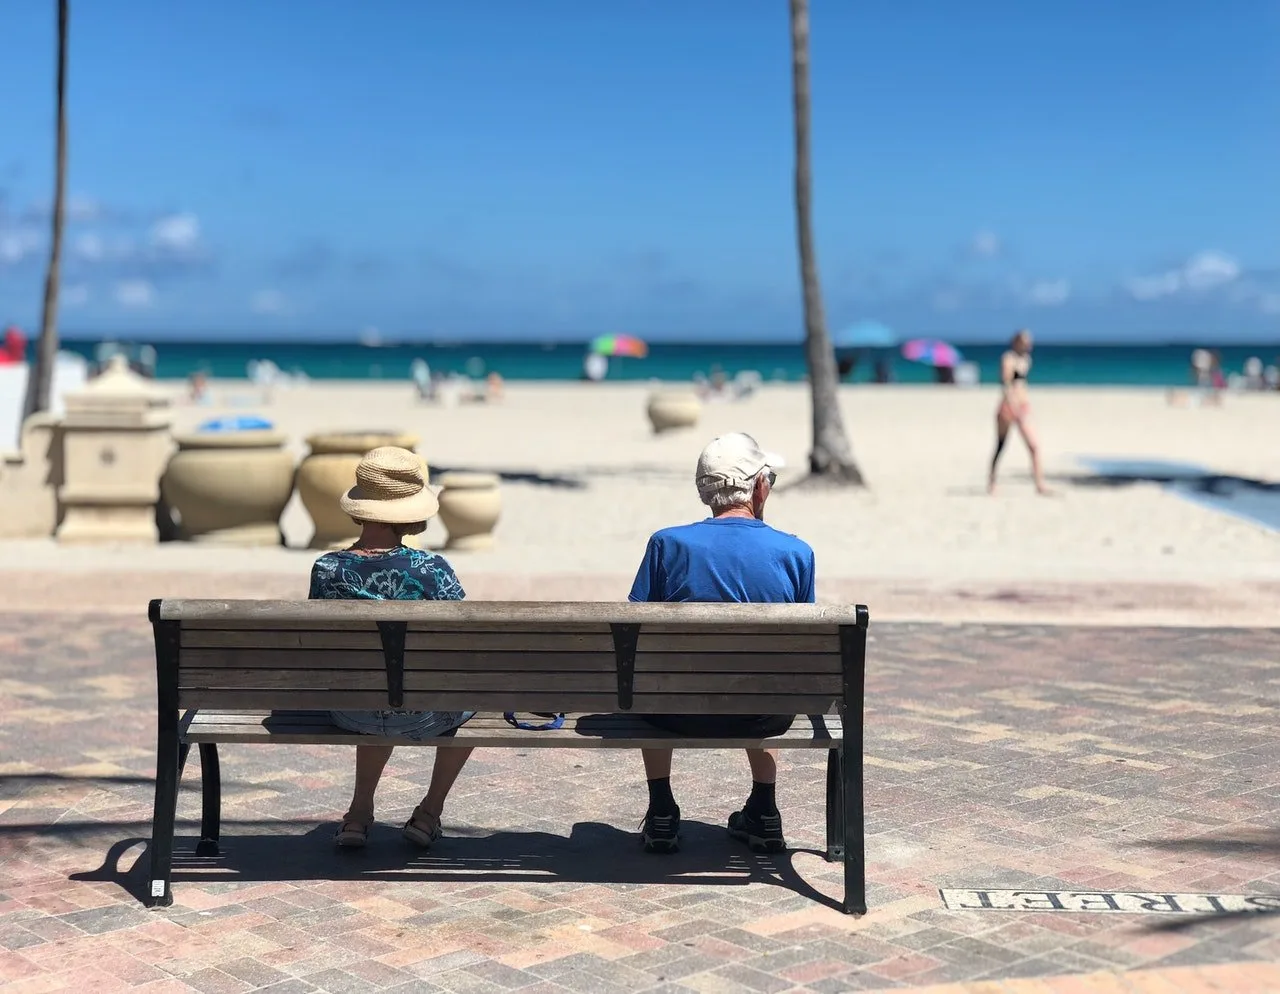 Top 4 Facts About Retirement Communities in Florida